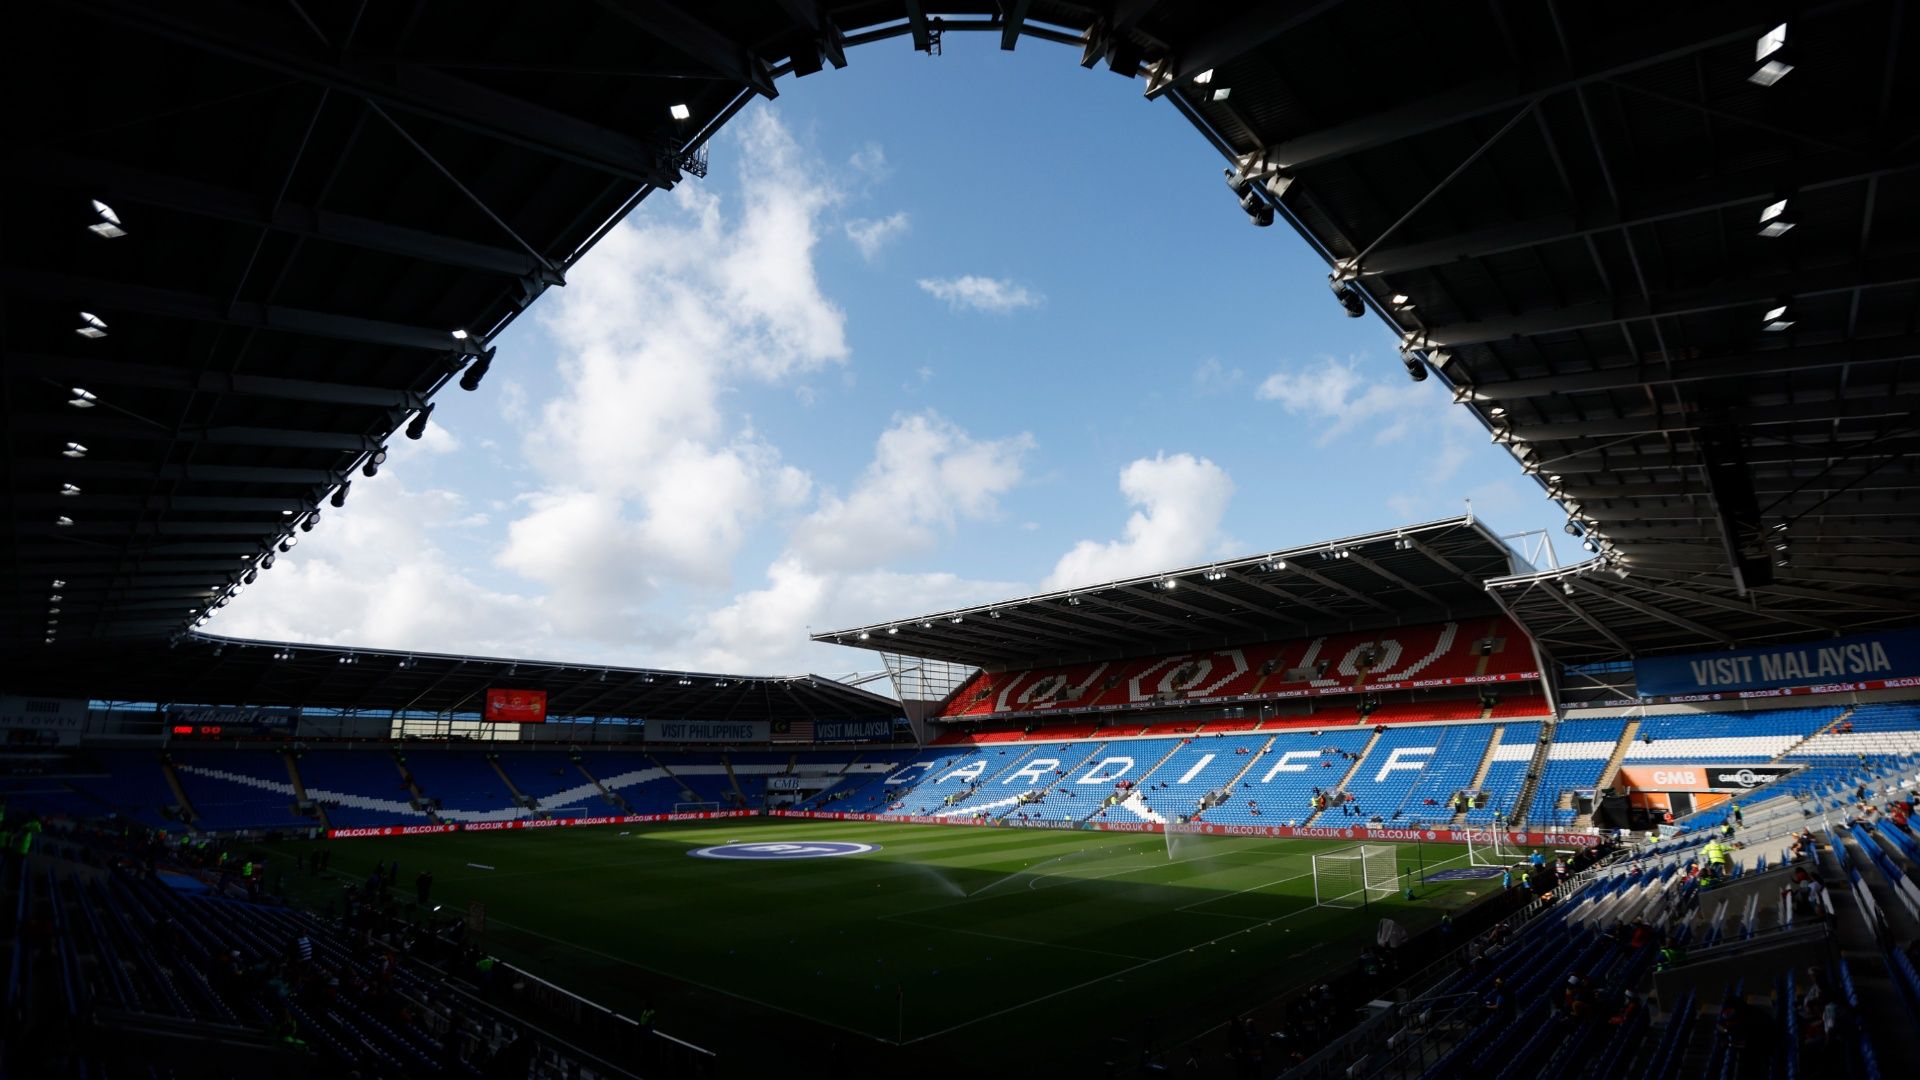 Cardiff City Stadium - All You Need to Know BEFORE You Go (with Photos)